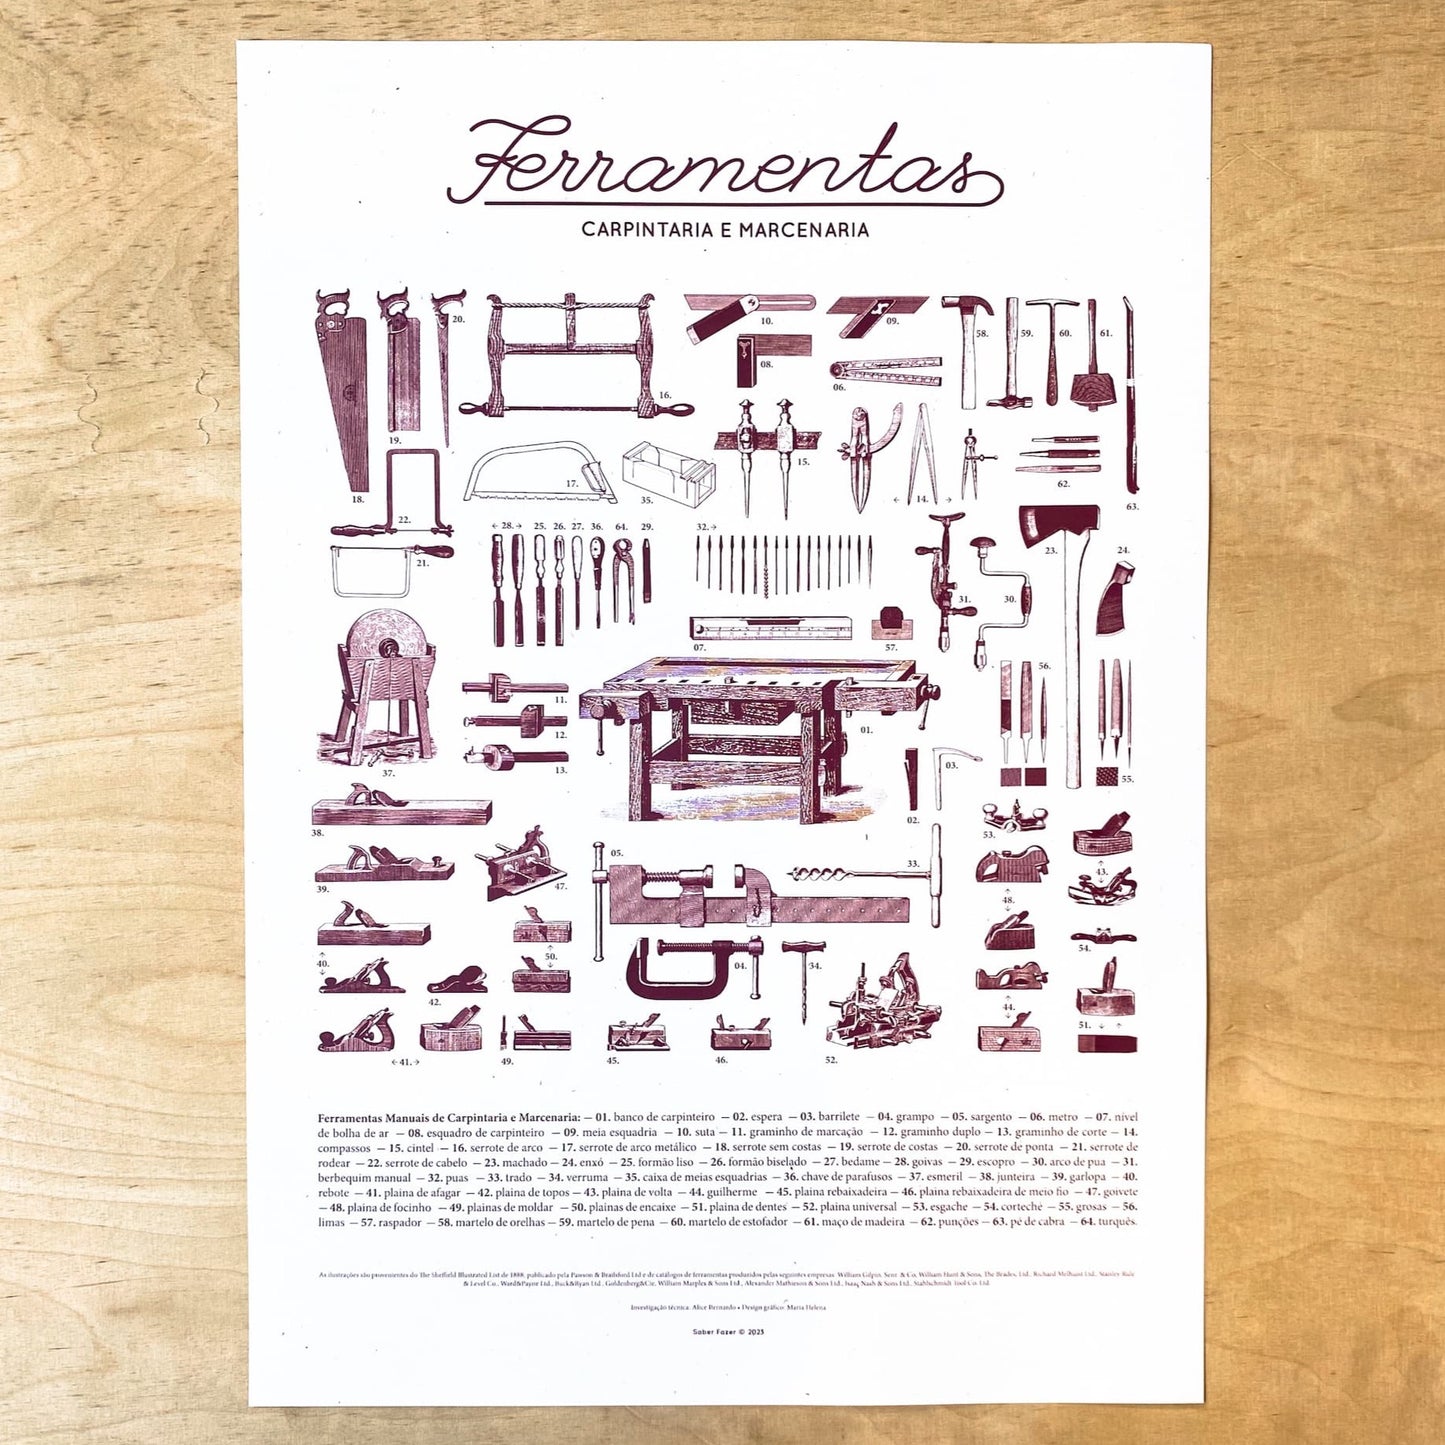 Woodworking and Carpentry Tools poster